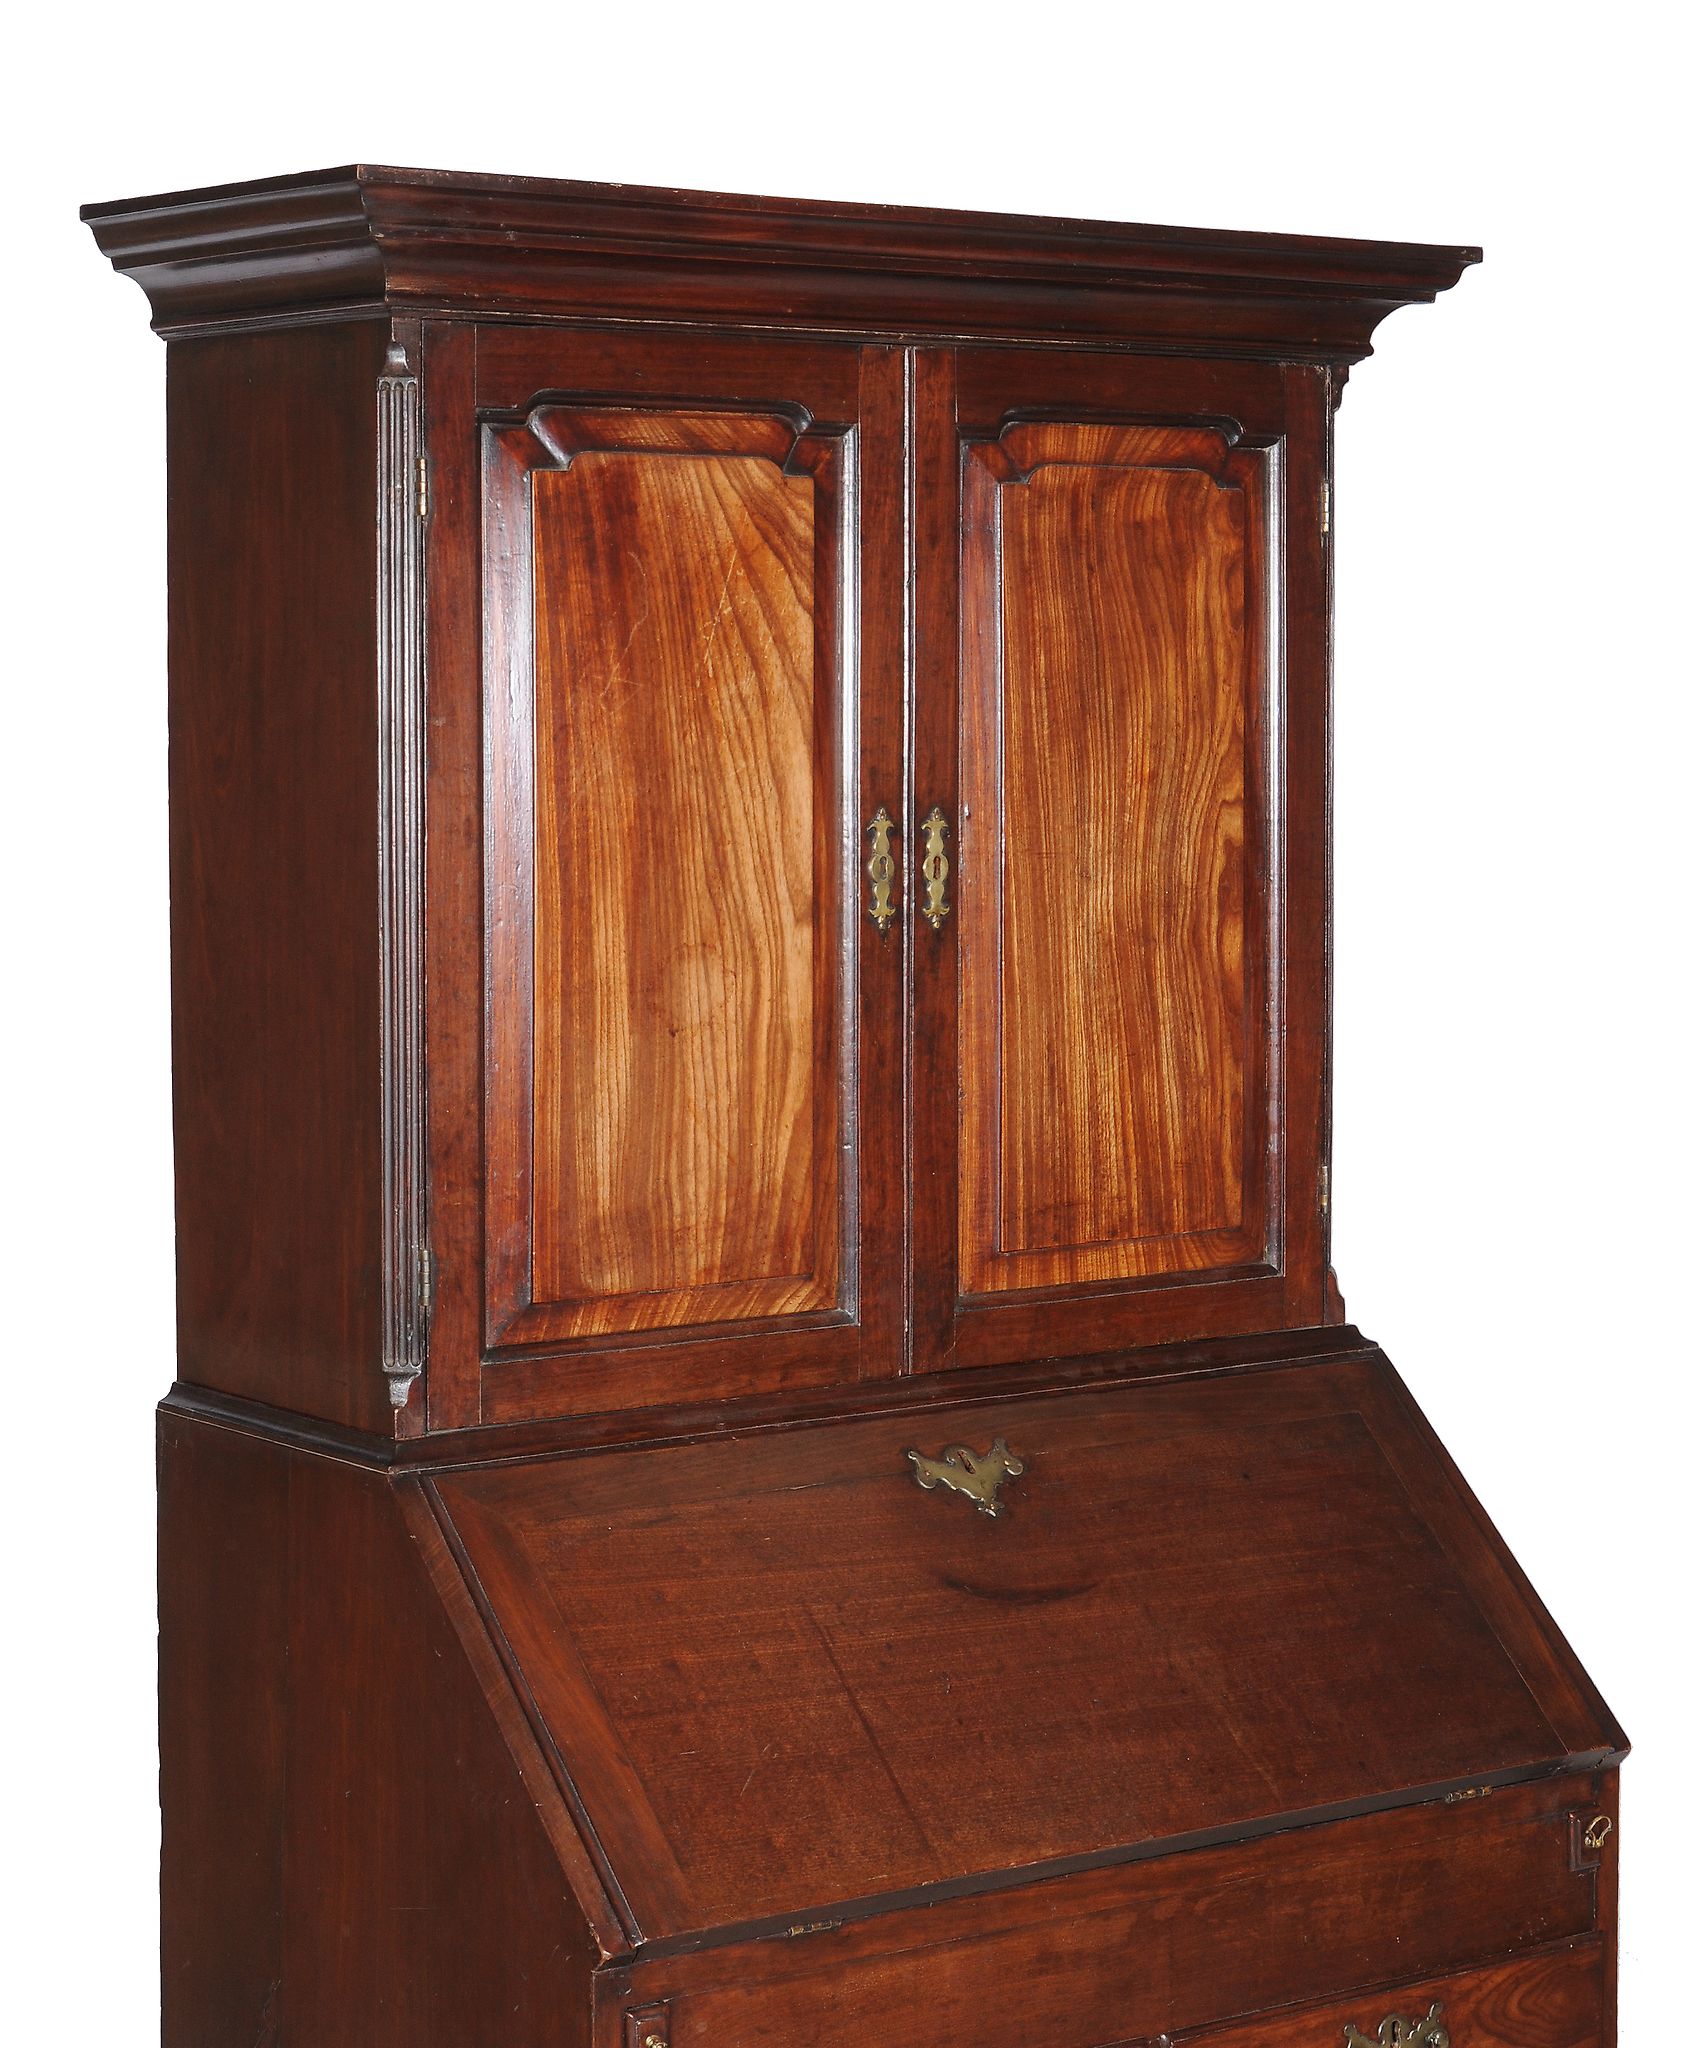 A George II mahogany bureau cabinet, circa 1750, the moulded cornice above a pair of panelled doors - Image 4 of 5